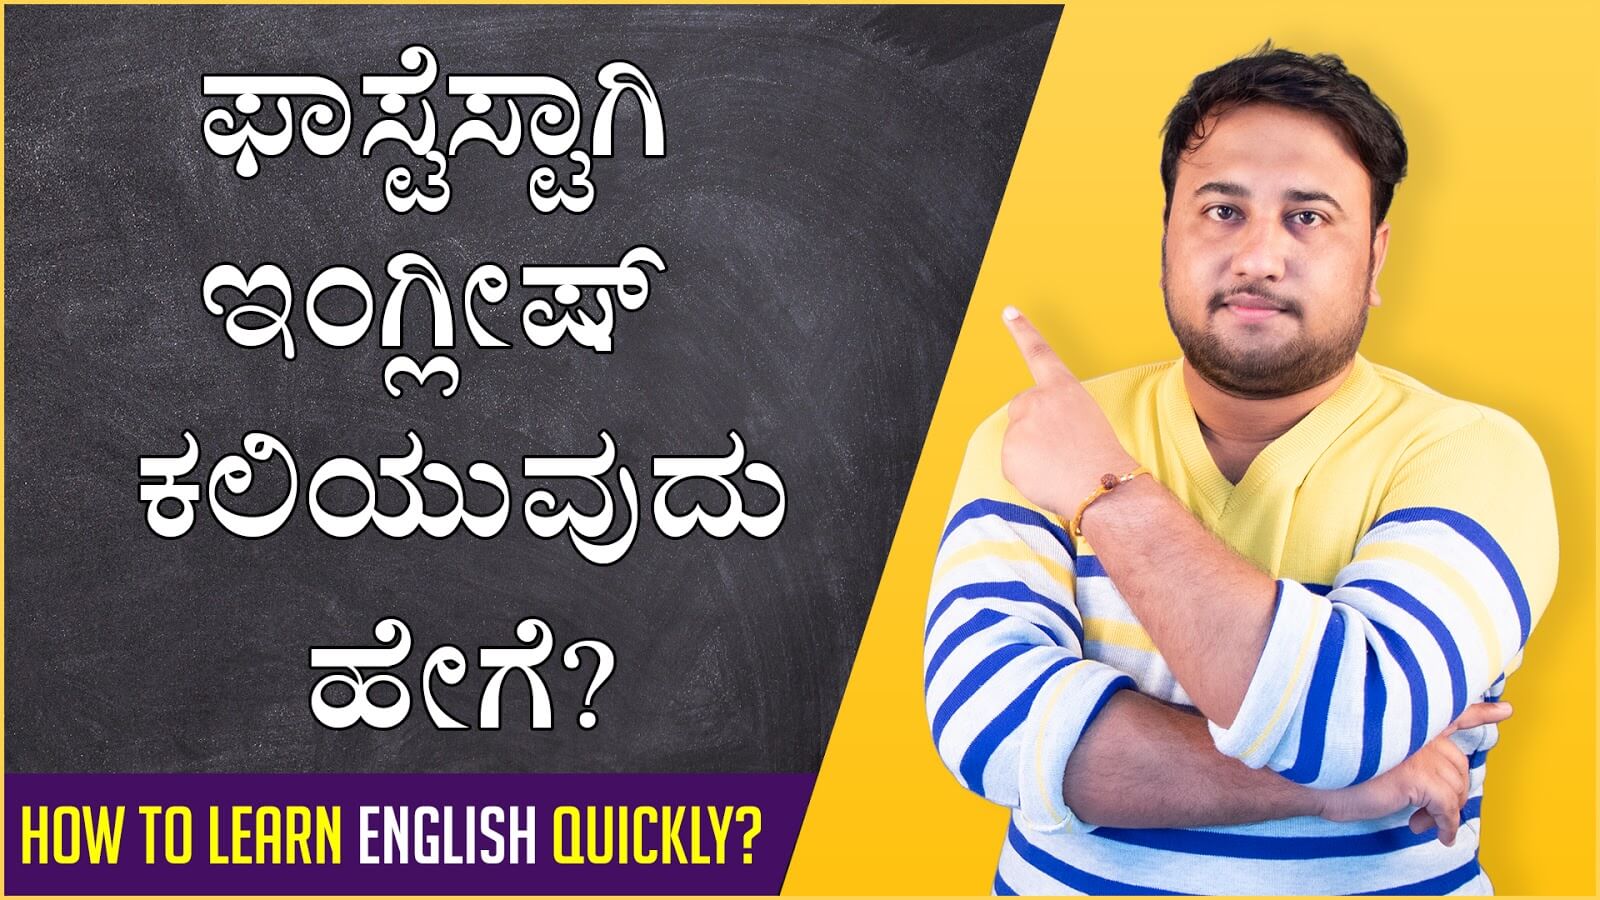 You are currently viewing ಫಾಸ್ಟೆಸ್ಟಾಗಿ ಇಂಗ್ಲೀಷ್ ಕಲಿಯುವುದು ಹೇಗೆ? – How to learn English Quickly? in Kannada